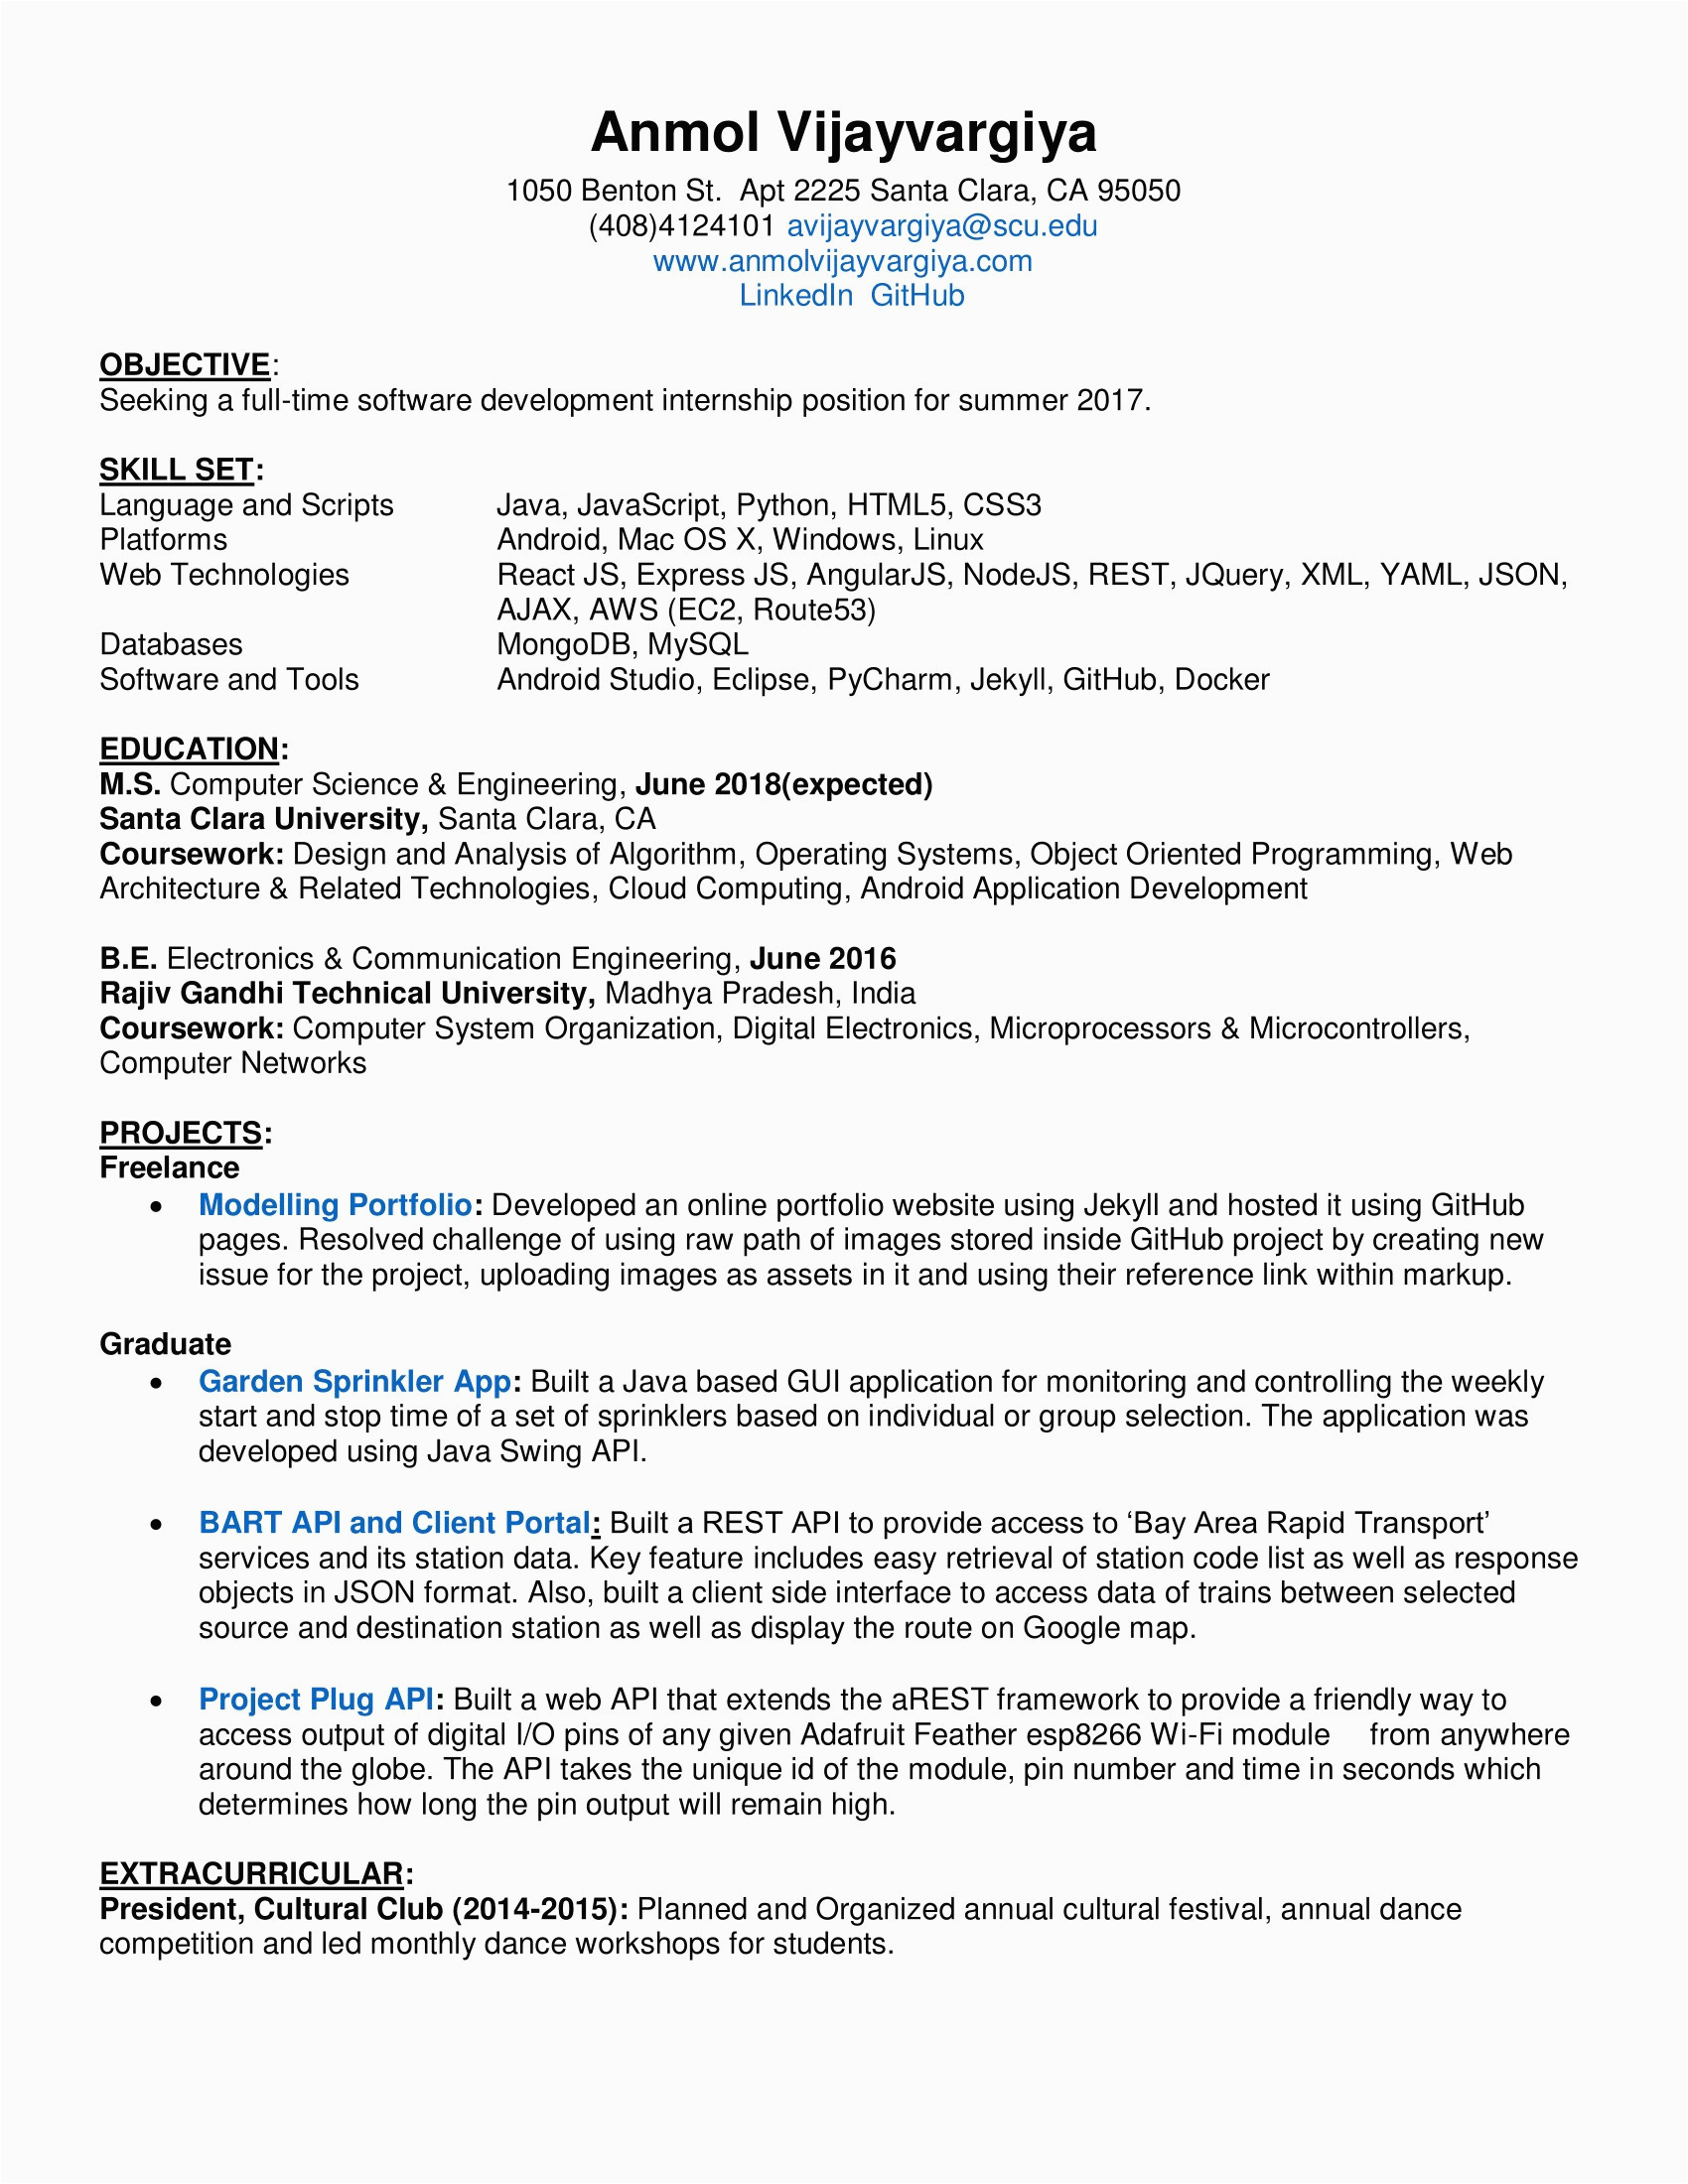 Sample Resume for Experienced Mainframe Developer Sample Resume for 2 Years Experience In Mainframe